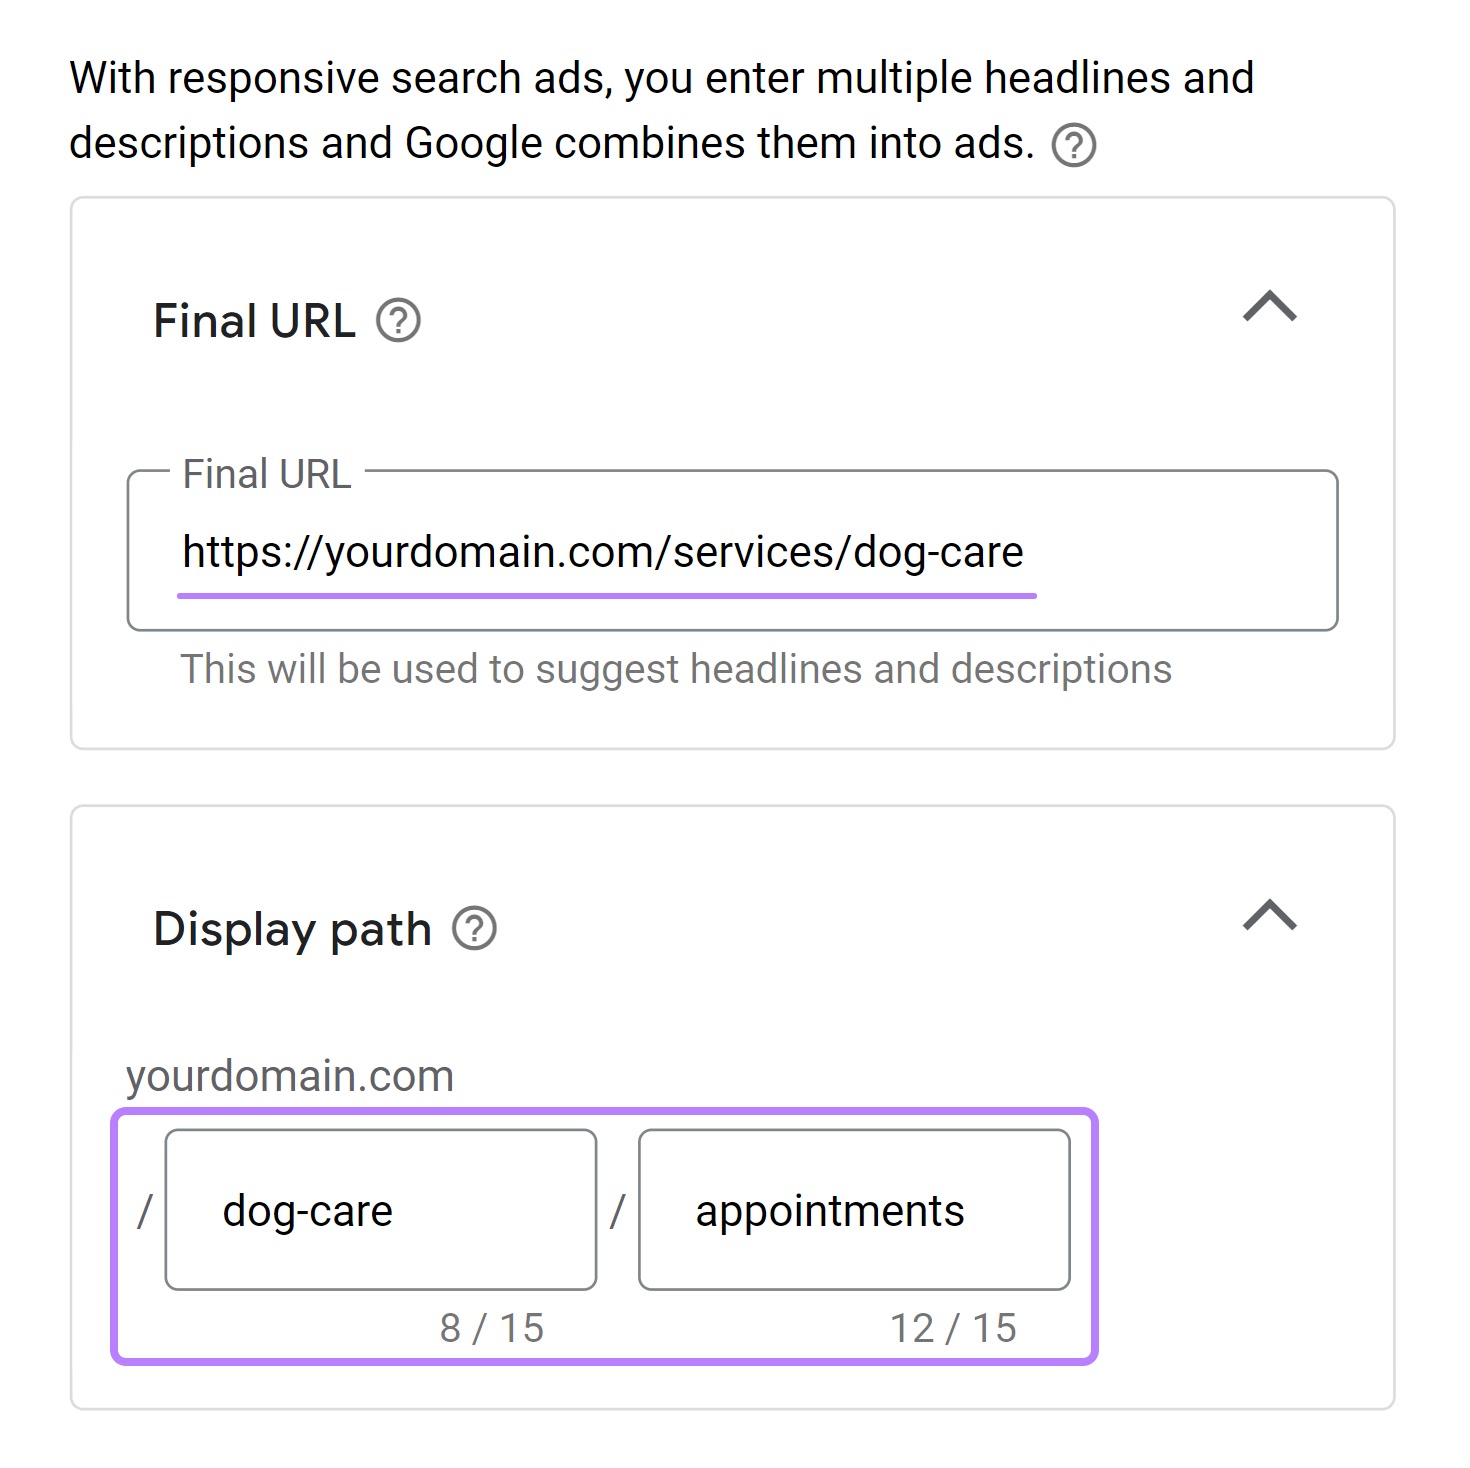 Adding the final URL and display path to Google Ads